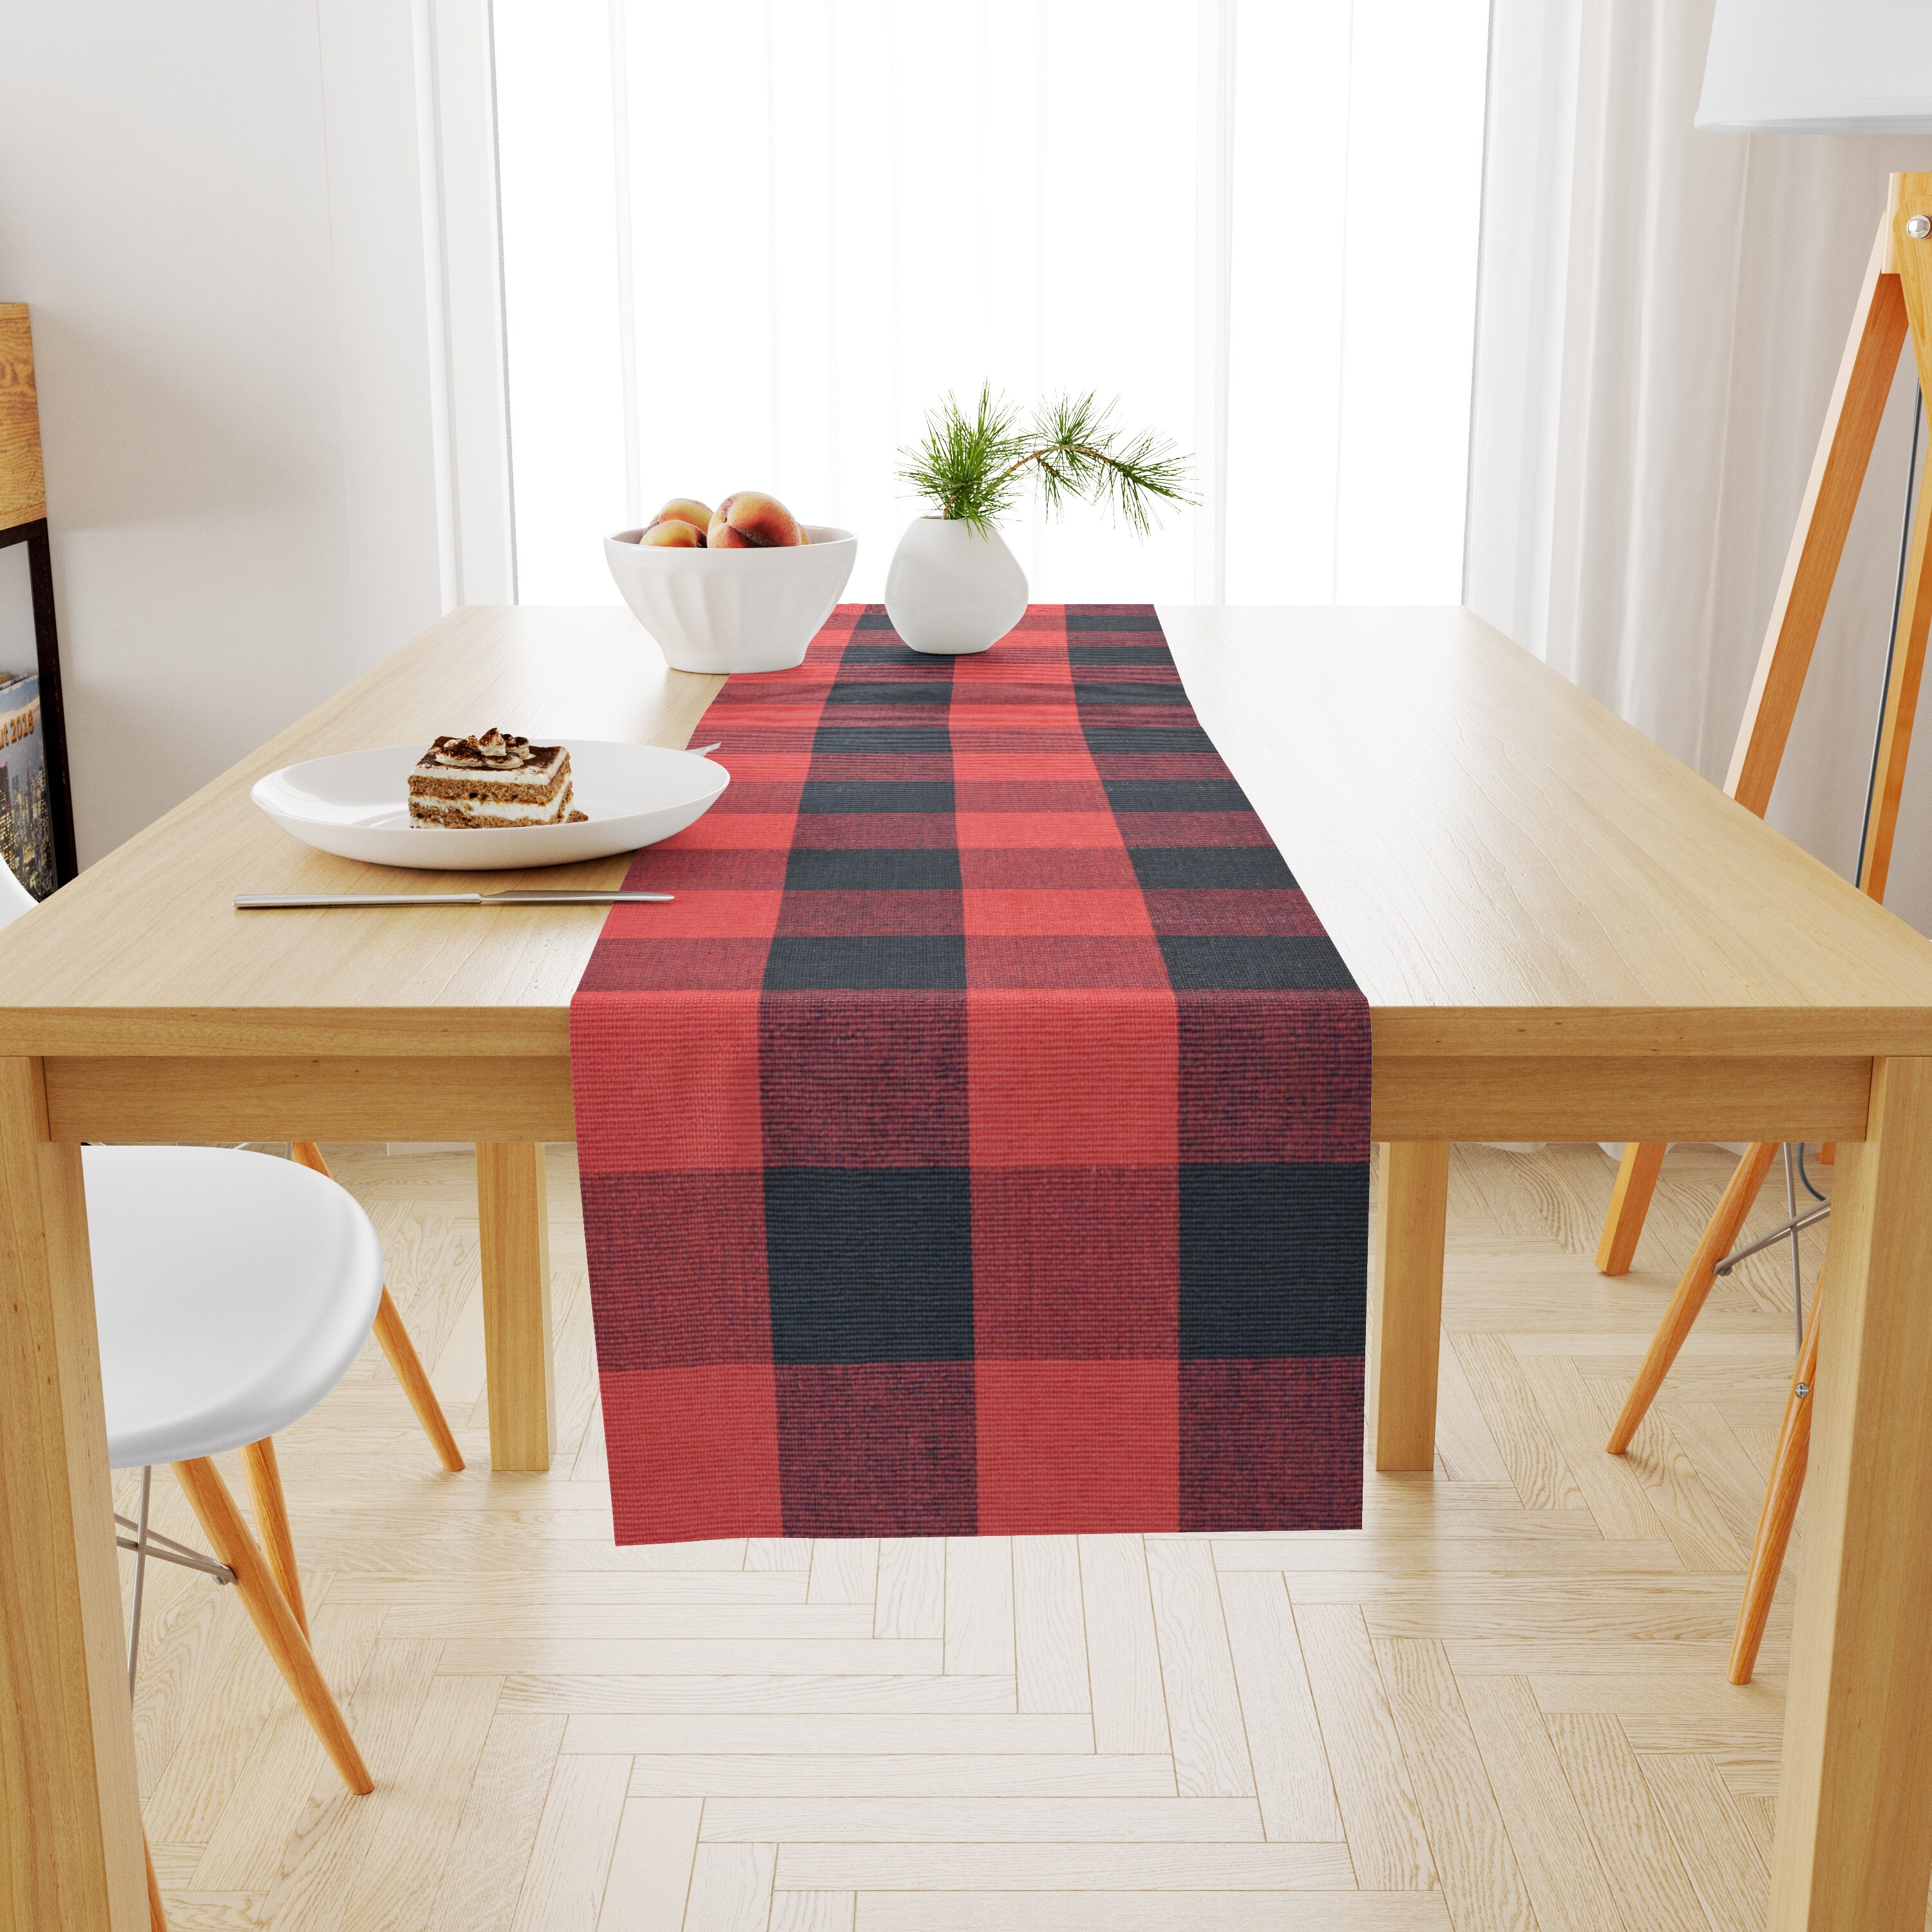 https://ak1.ostkcdn.com/images/products/is/images/direct/16b6d11b1a13c5d1865032035afda4938d55030e/Fabstyles-Buffalo-Check-Cotton-Machine-Washable-Table-Runner.jpg